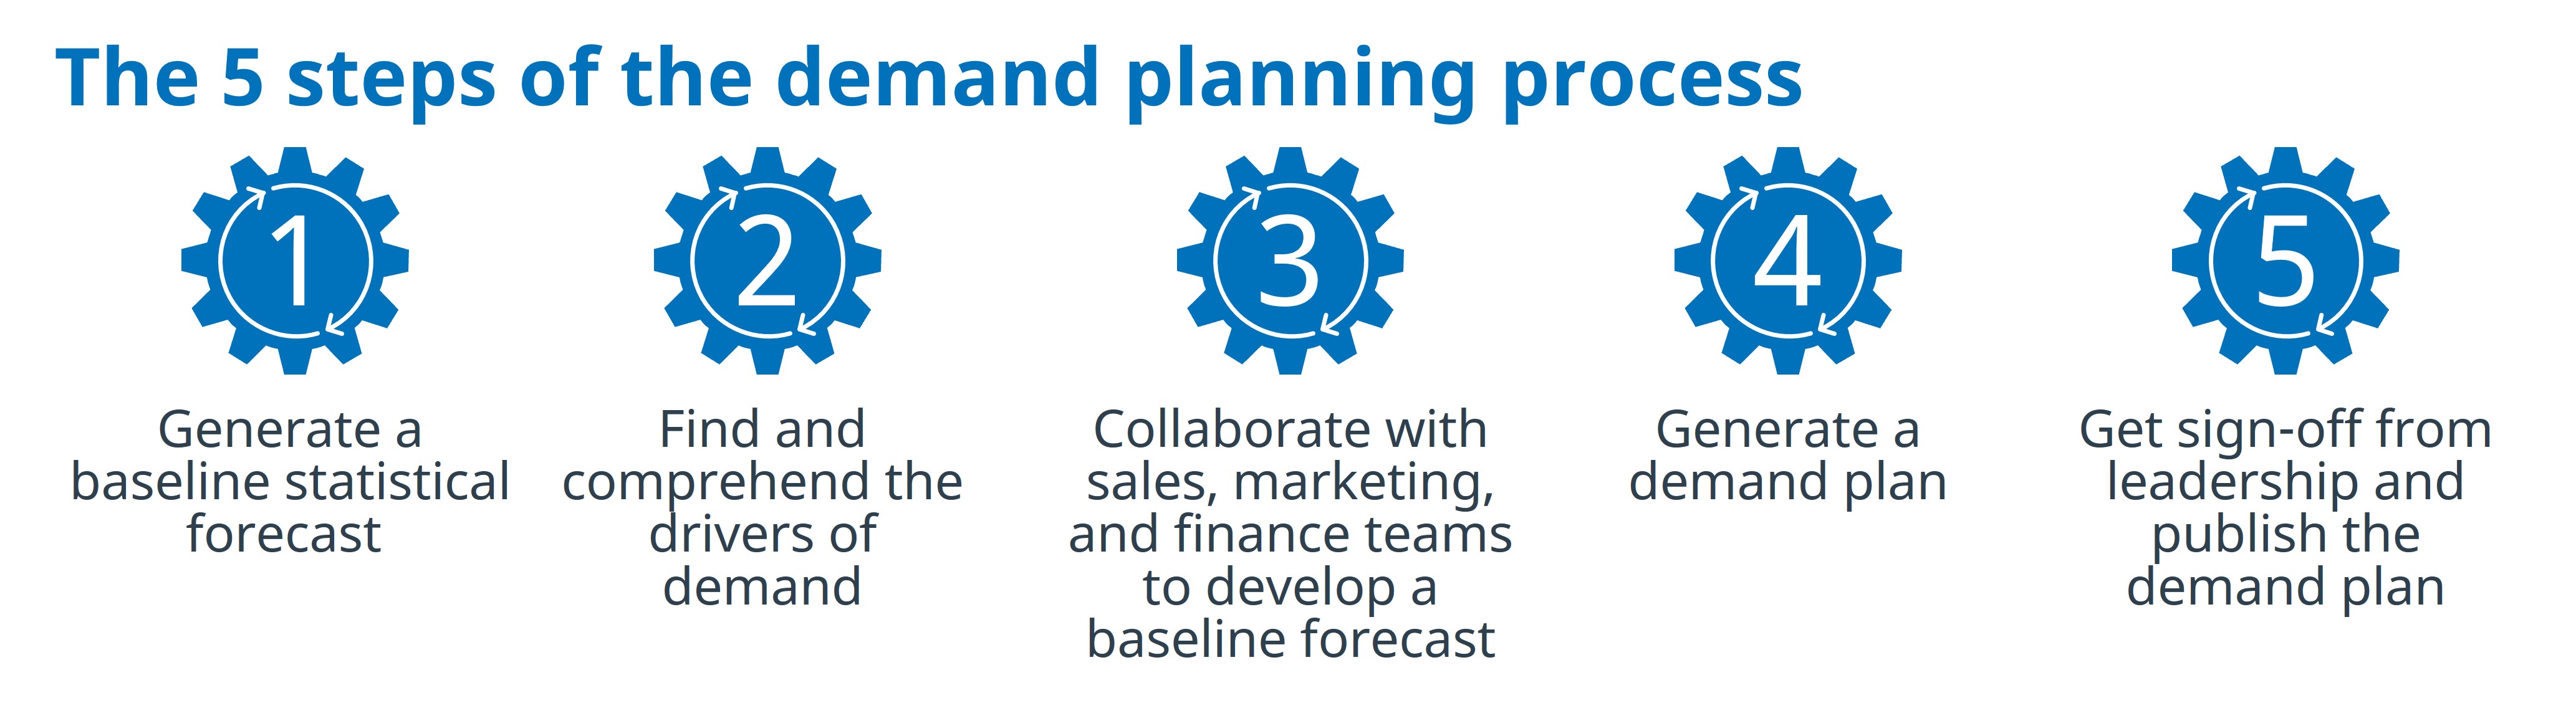 Implementing-a-demand-planning-transformation-5-steps-of-demand-planning-process-graphic.jpg